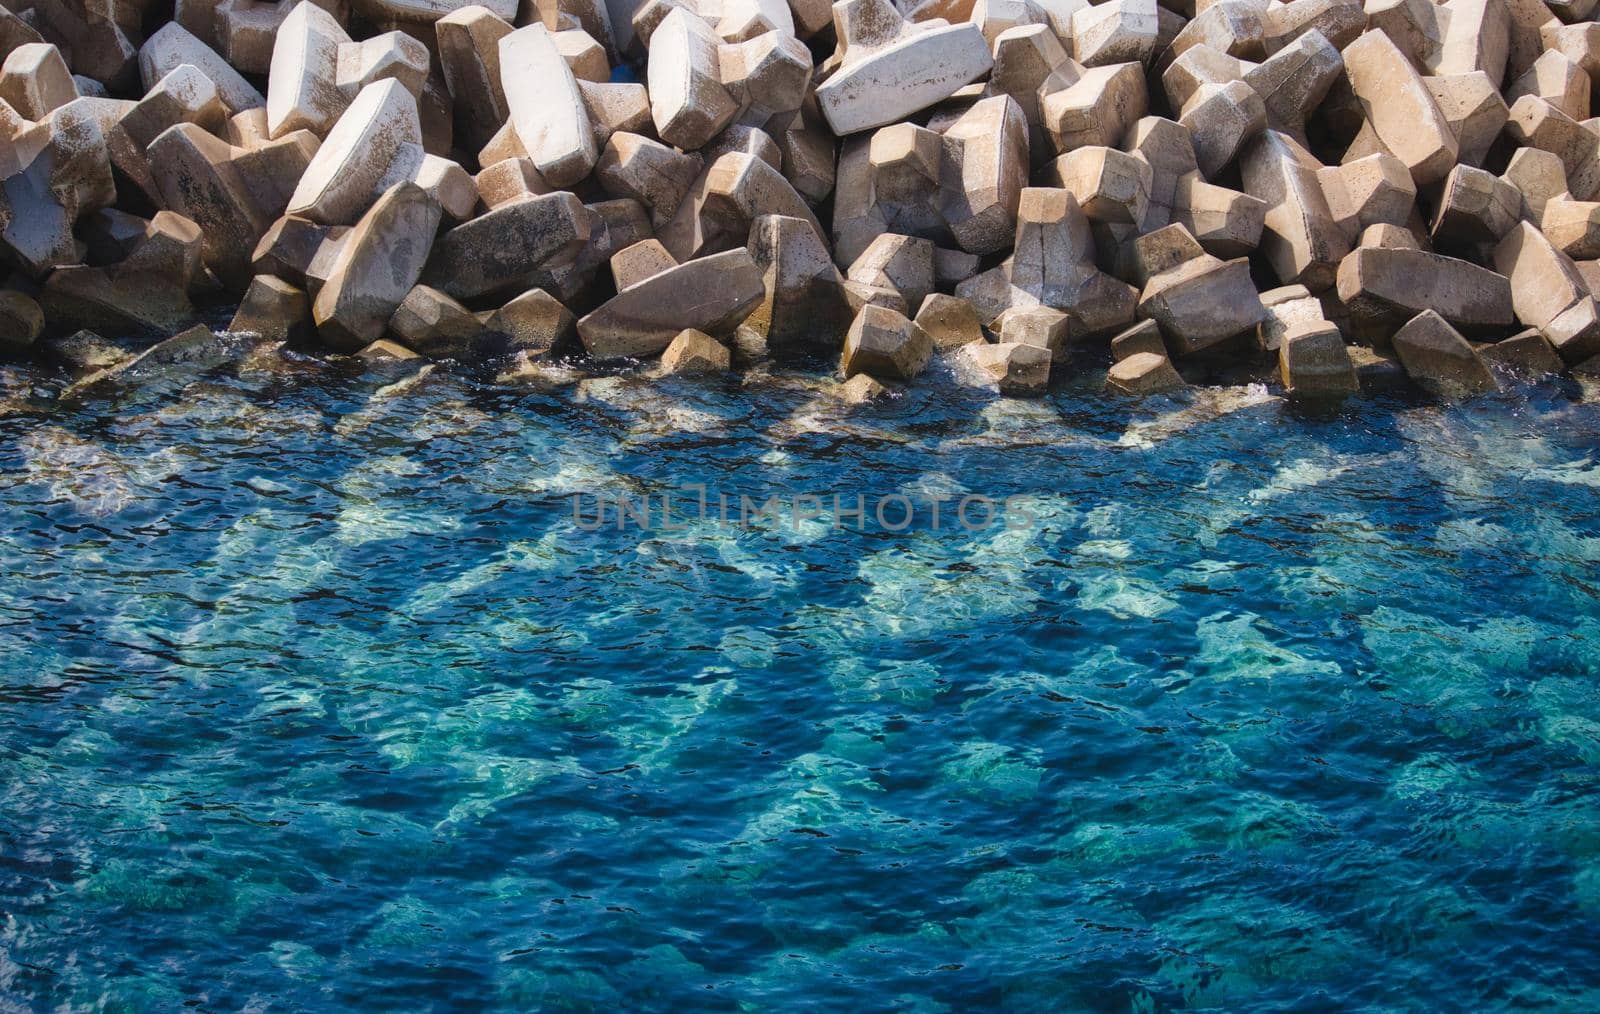 Textured background of clear blue sea and white stone tetrapods used to prevent erosion by tennesseewitney